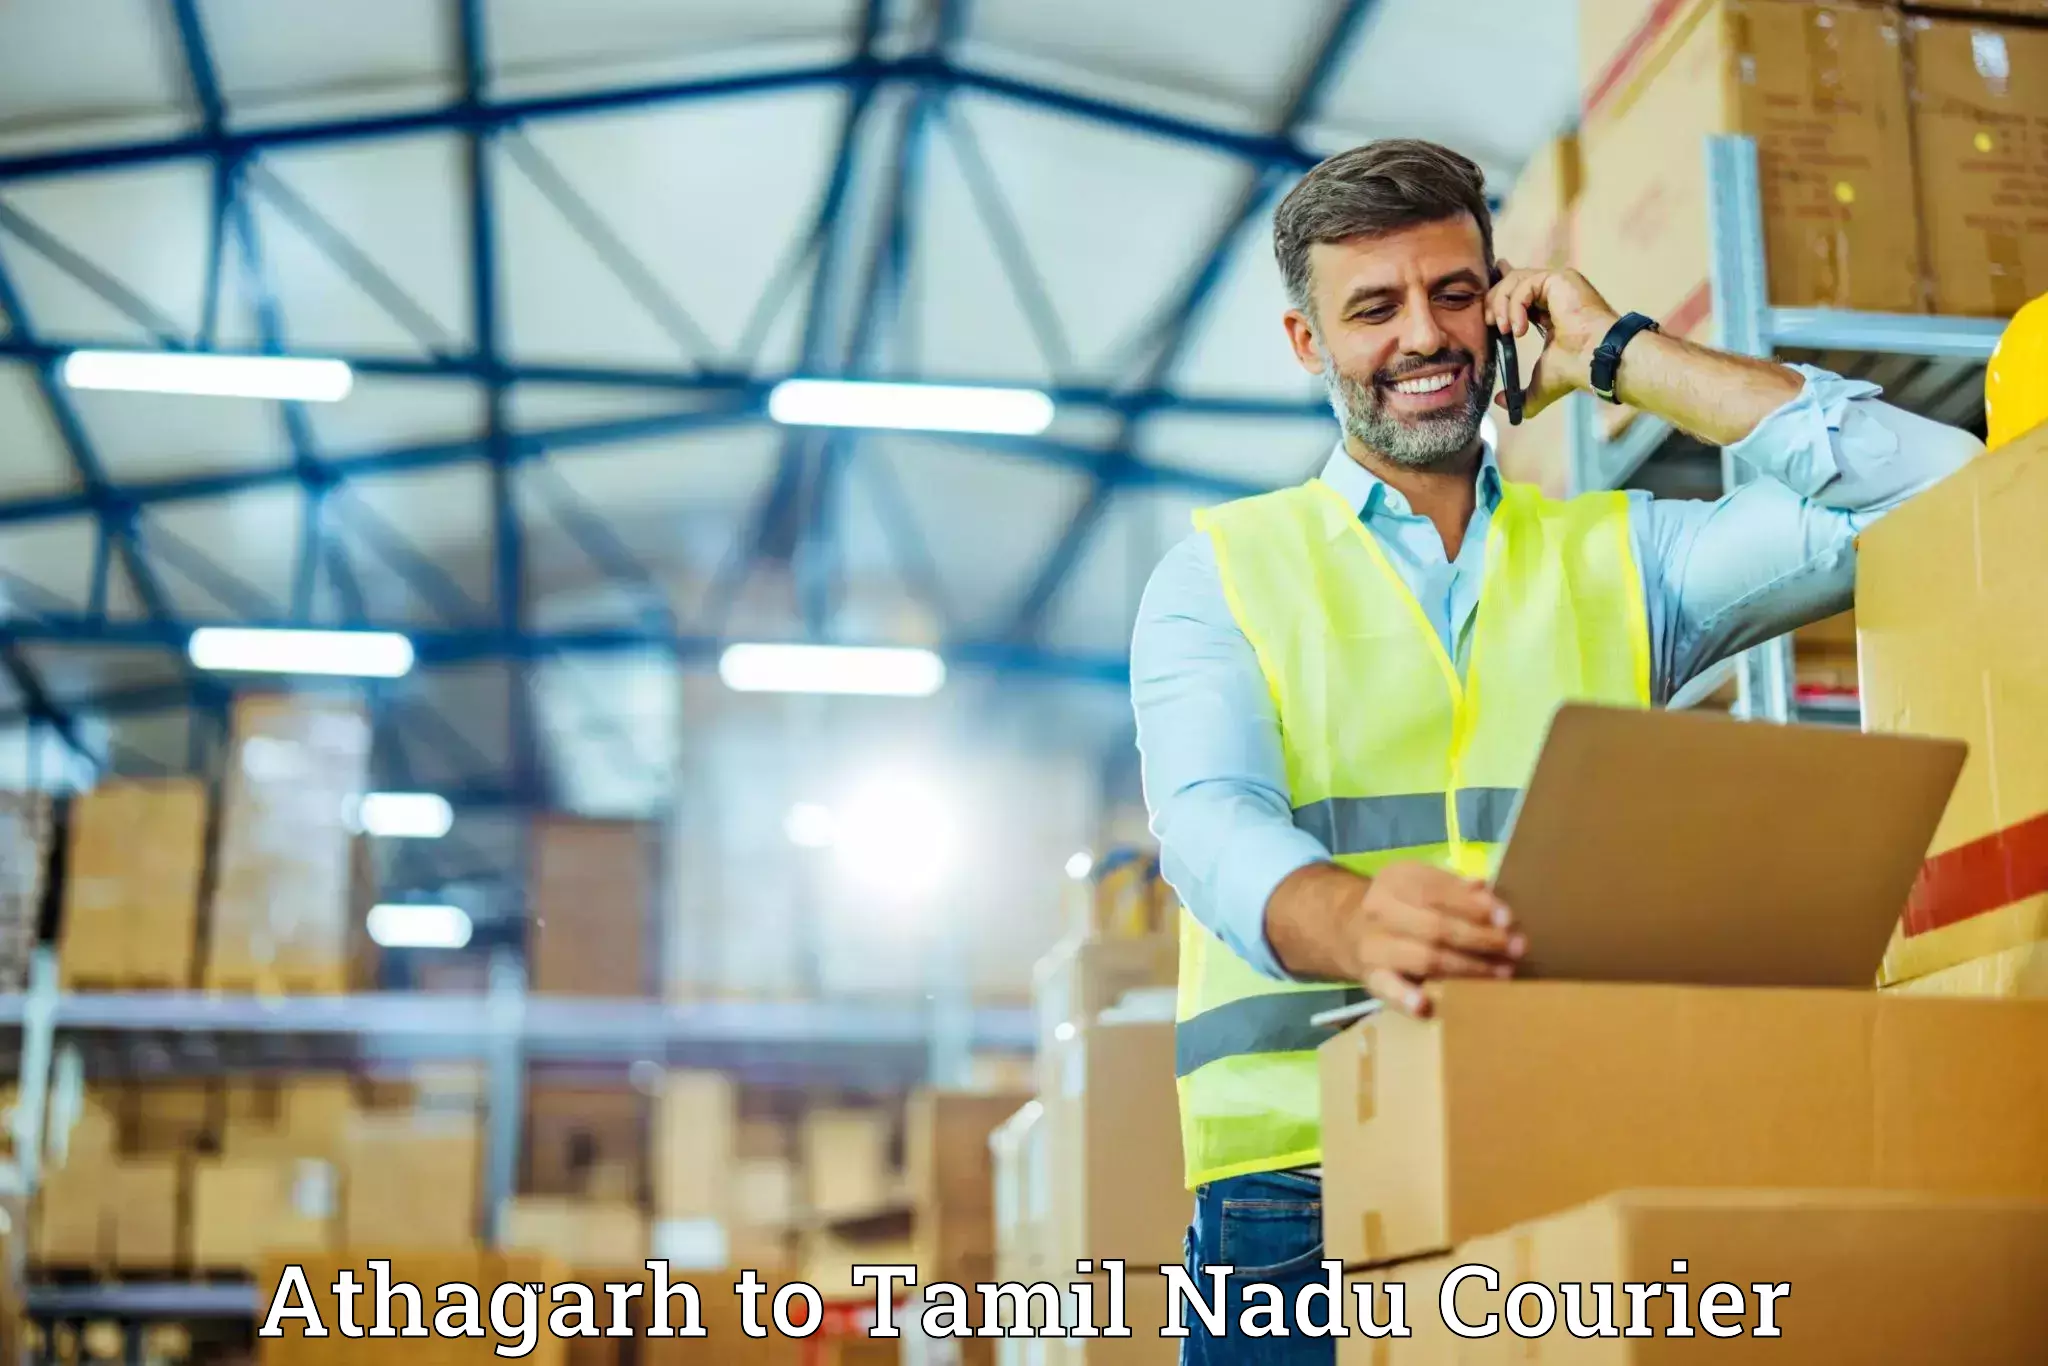 Moving and storage services Athagarh to Erode